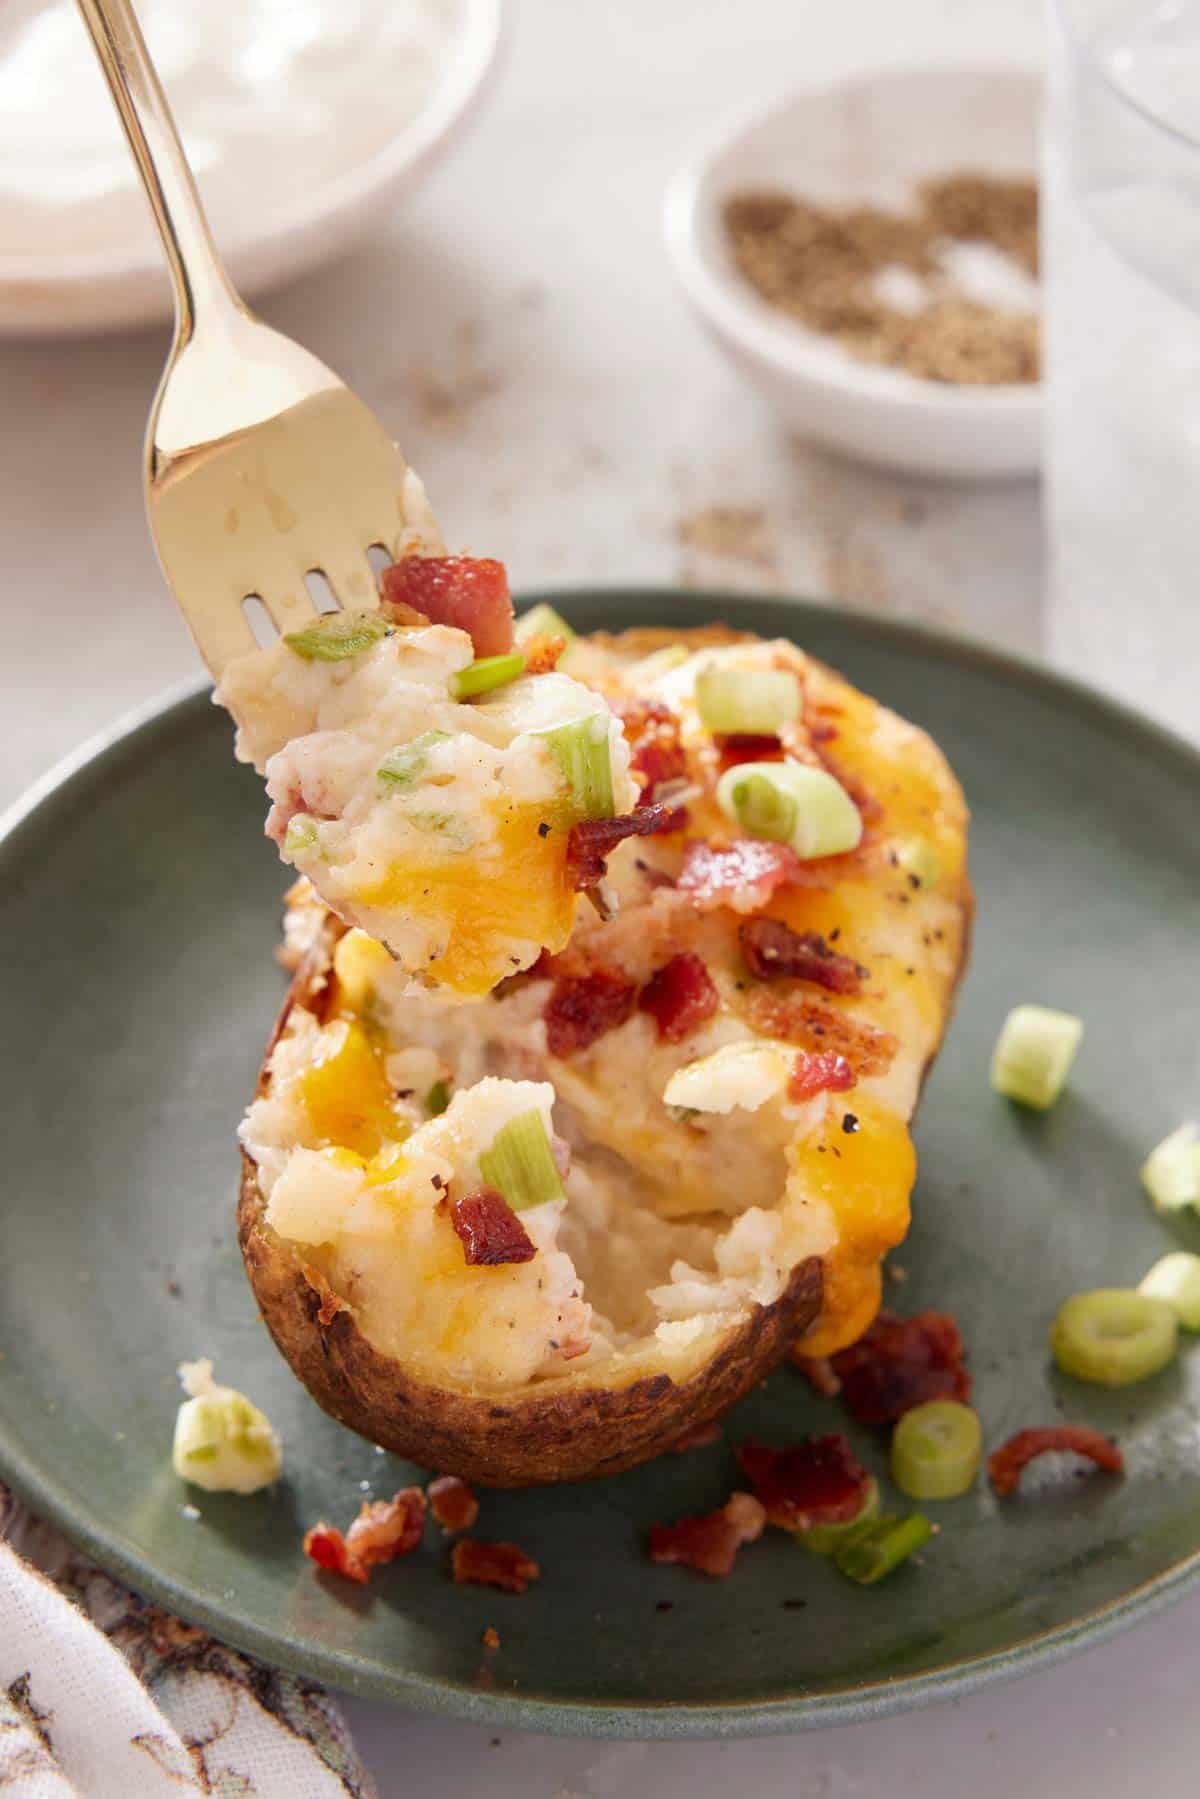 A forkful lifting up a bite of twice-baked potato on a plate.